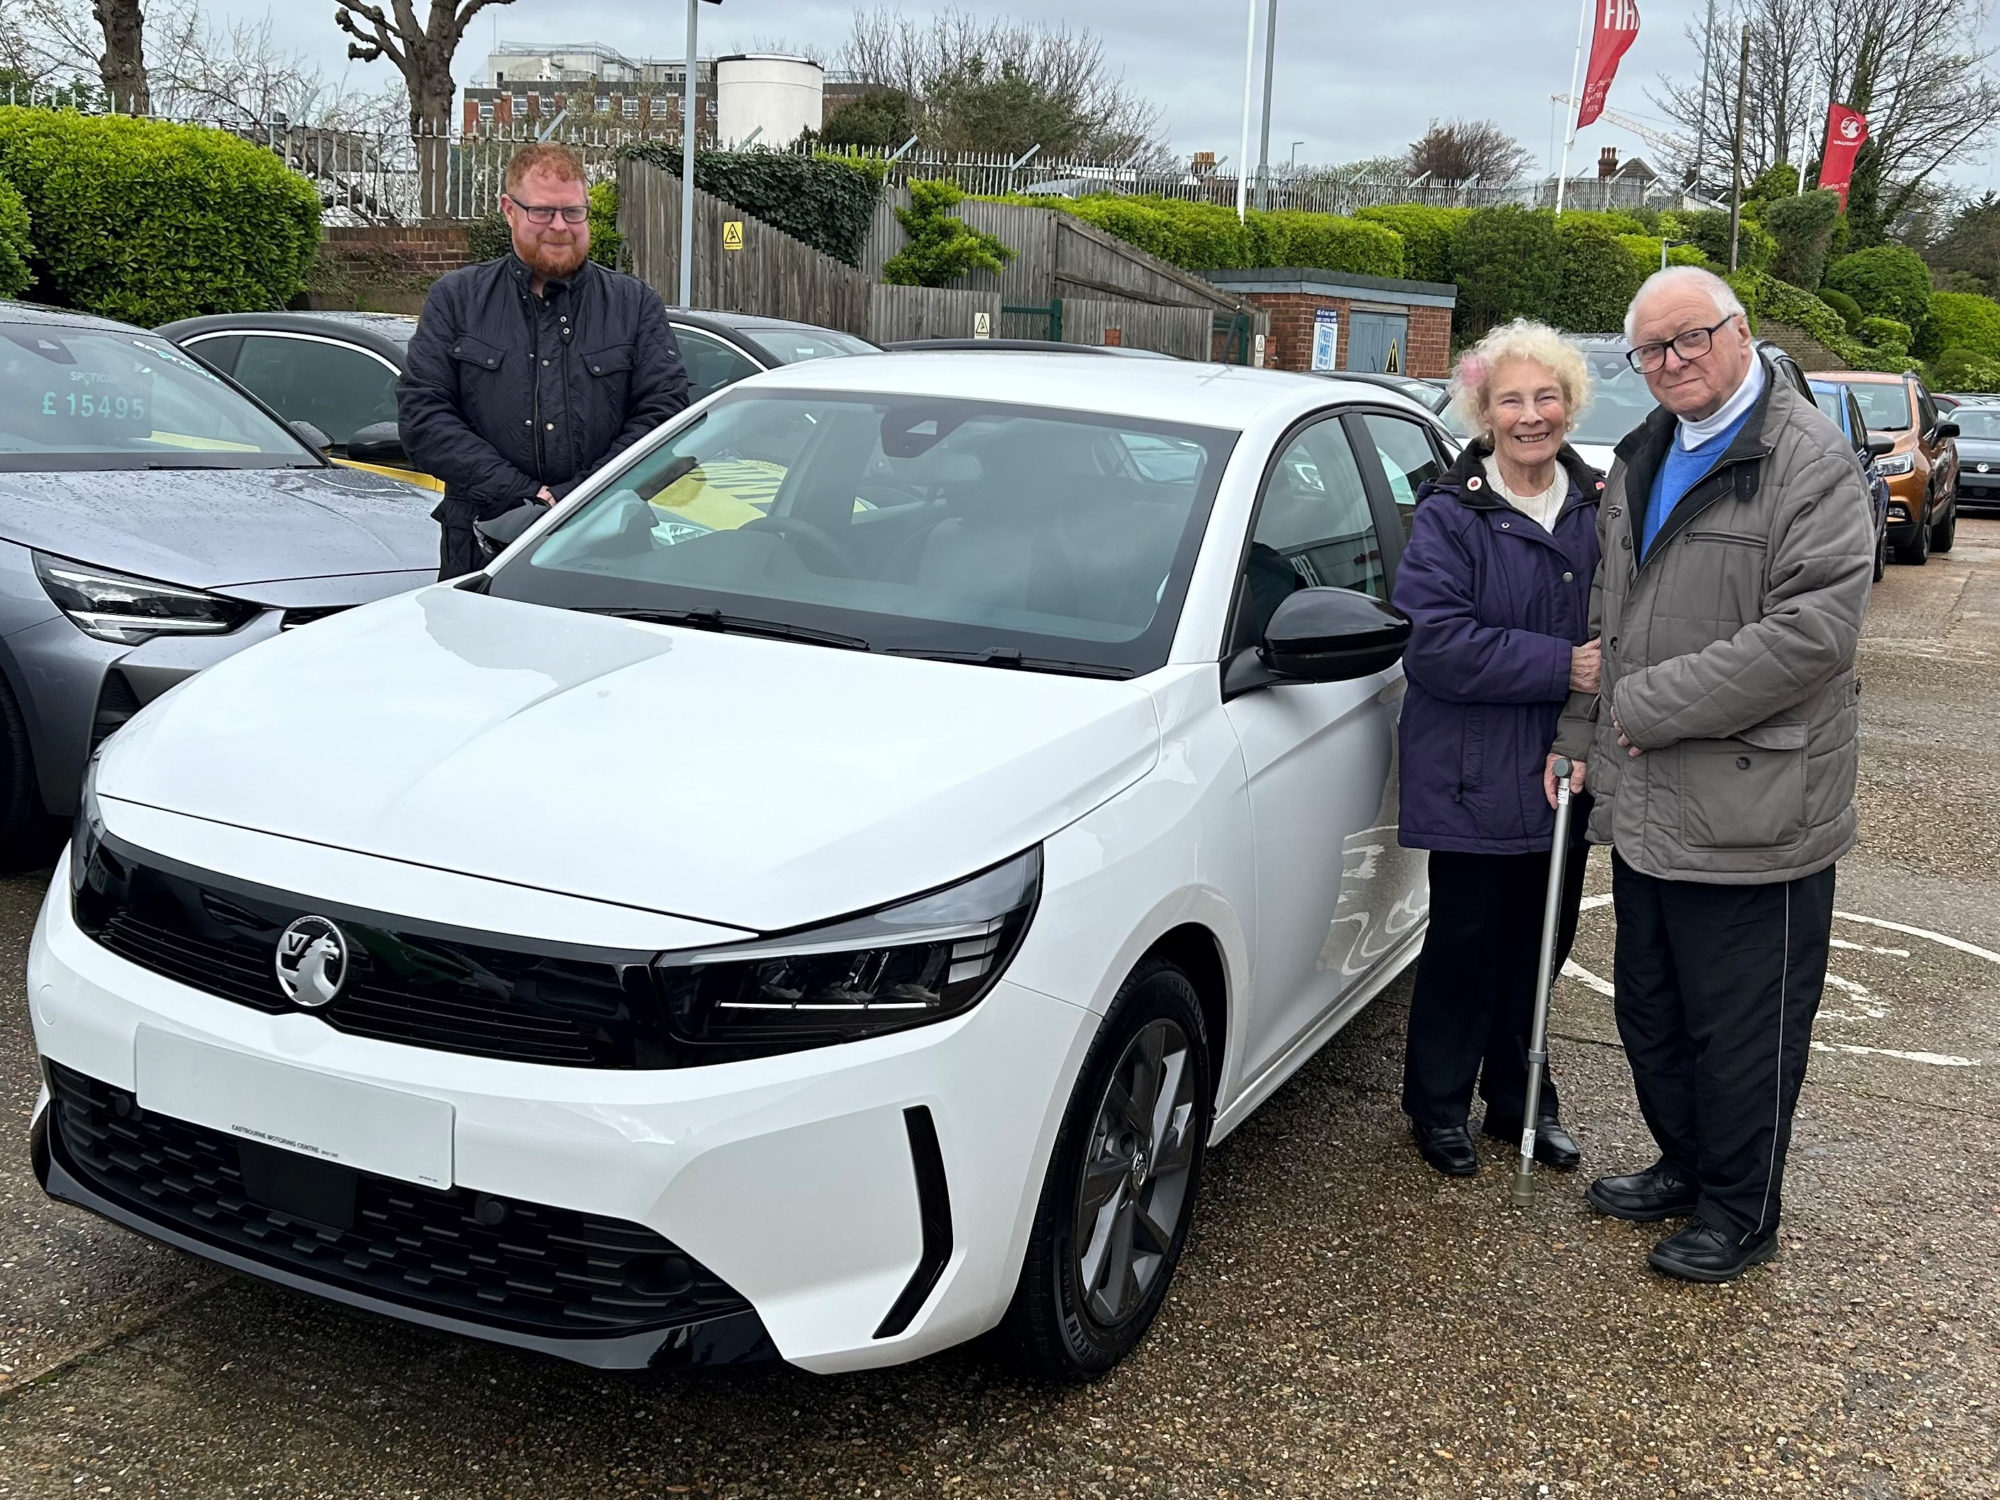 Bryan and Margaret Constable picking up their New Vauxhall Corsa from Phil Mulvey